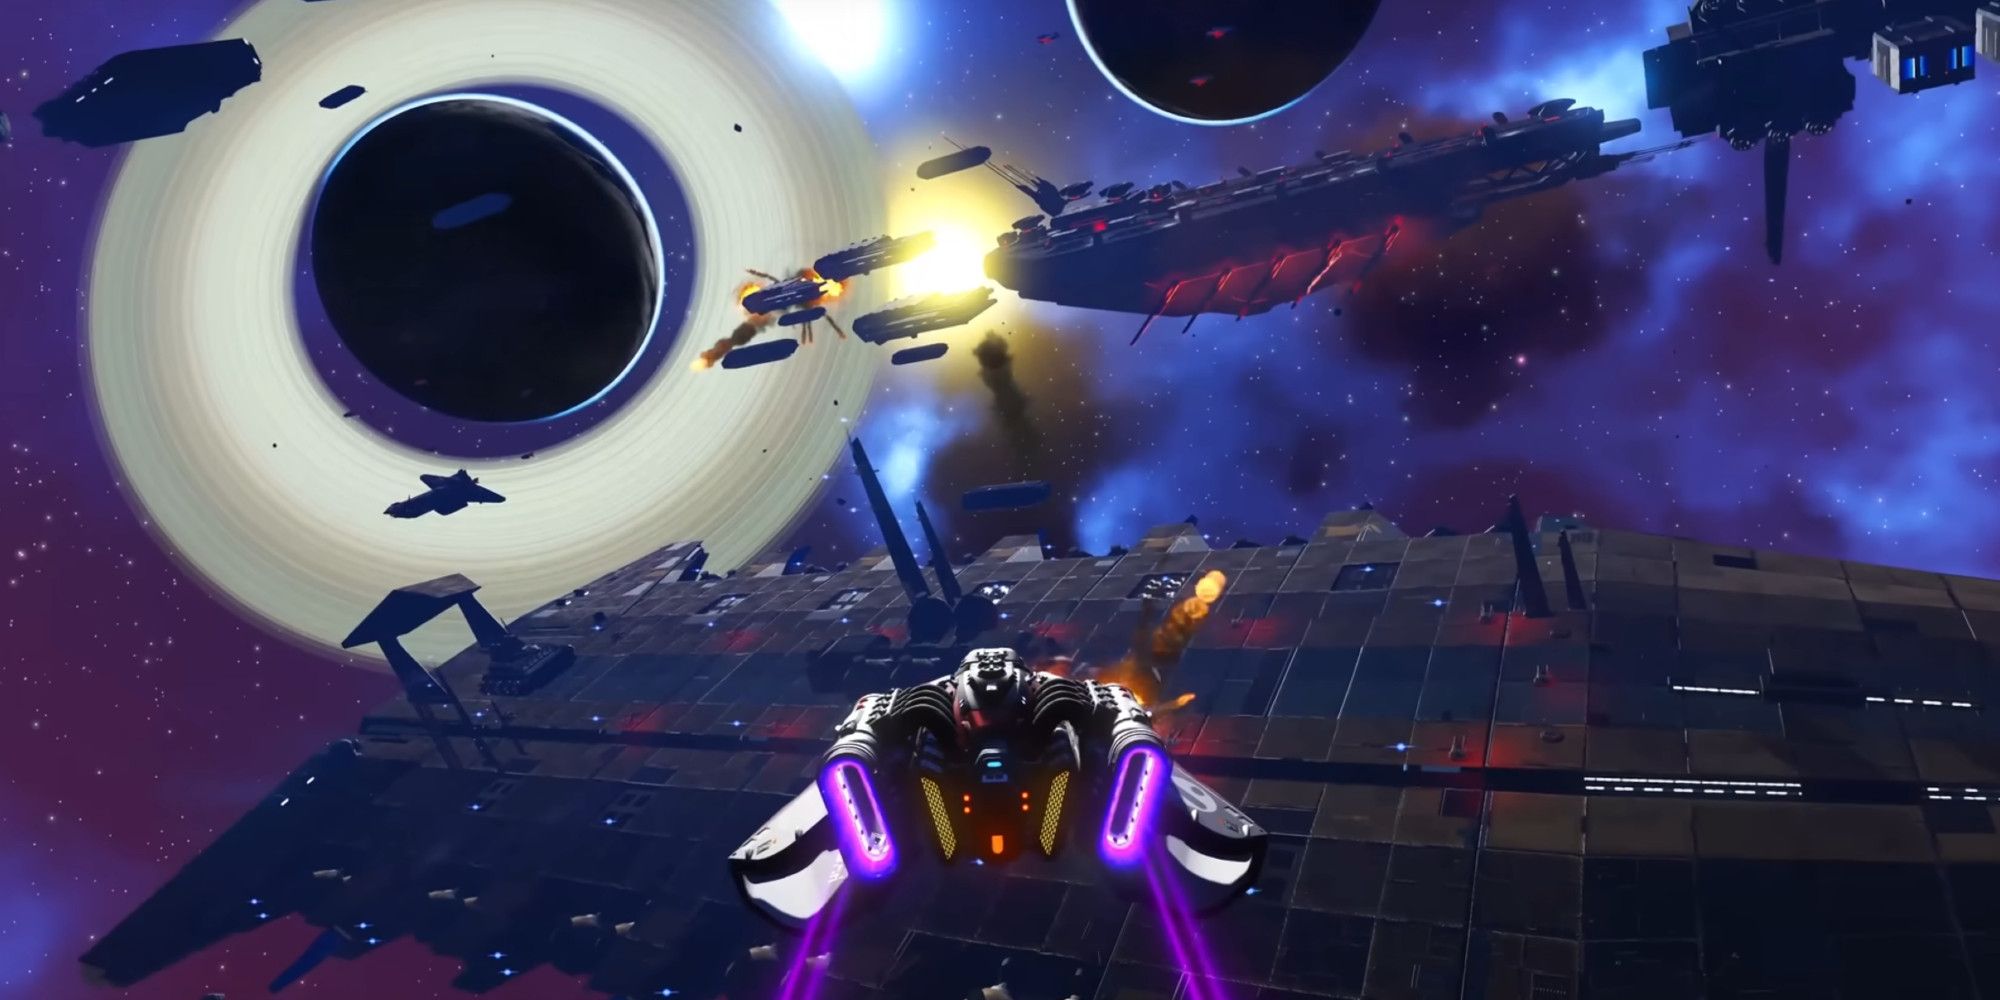 A small ship flying towards a battle in the middle of space, with a large planet in the background